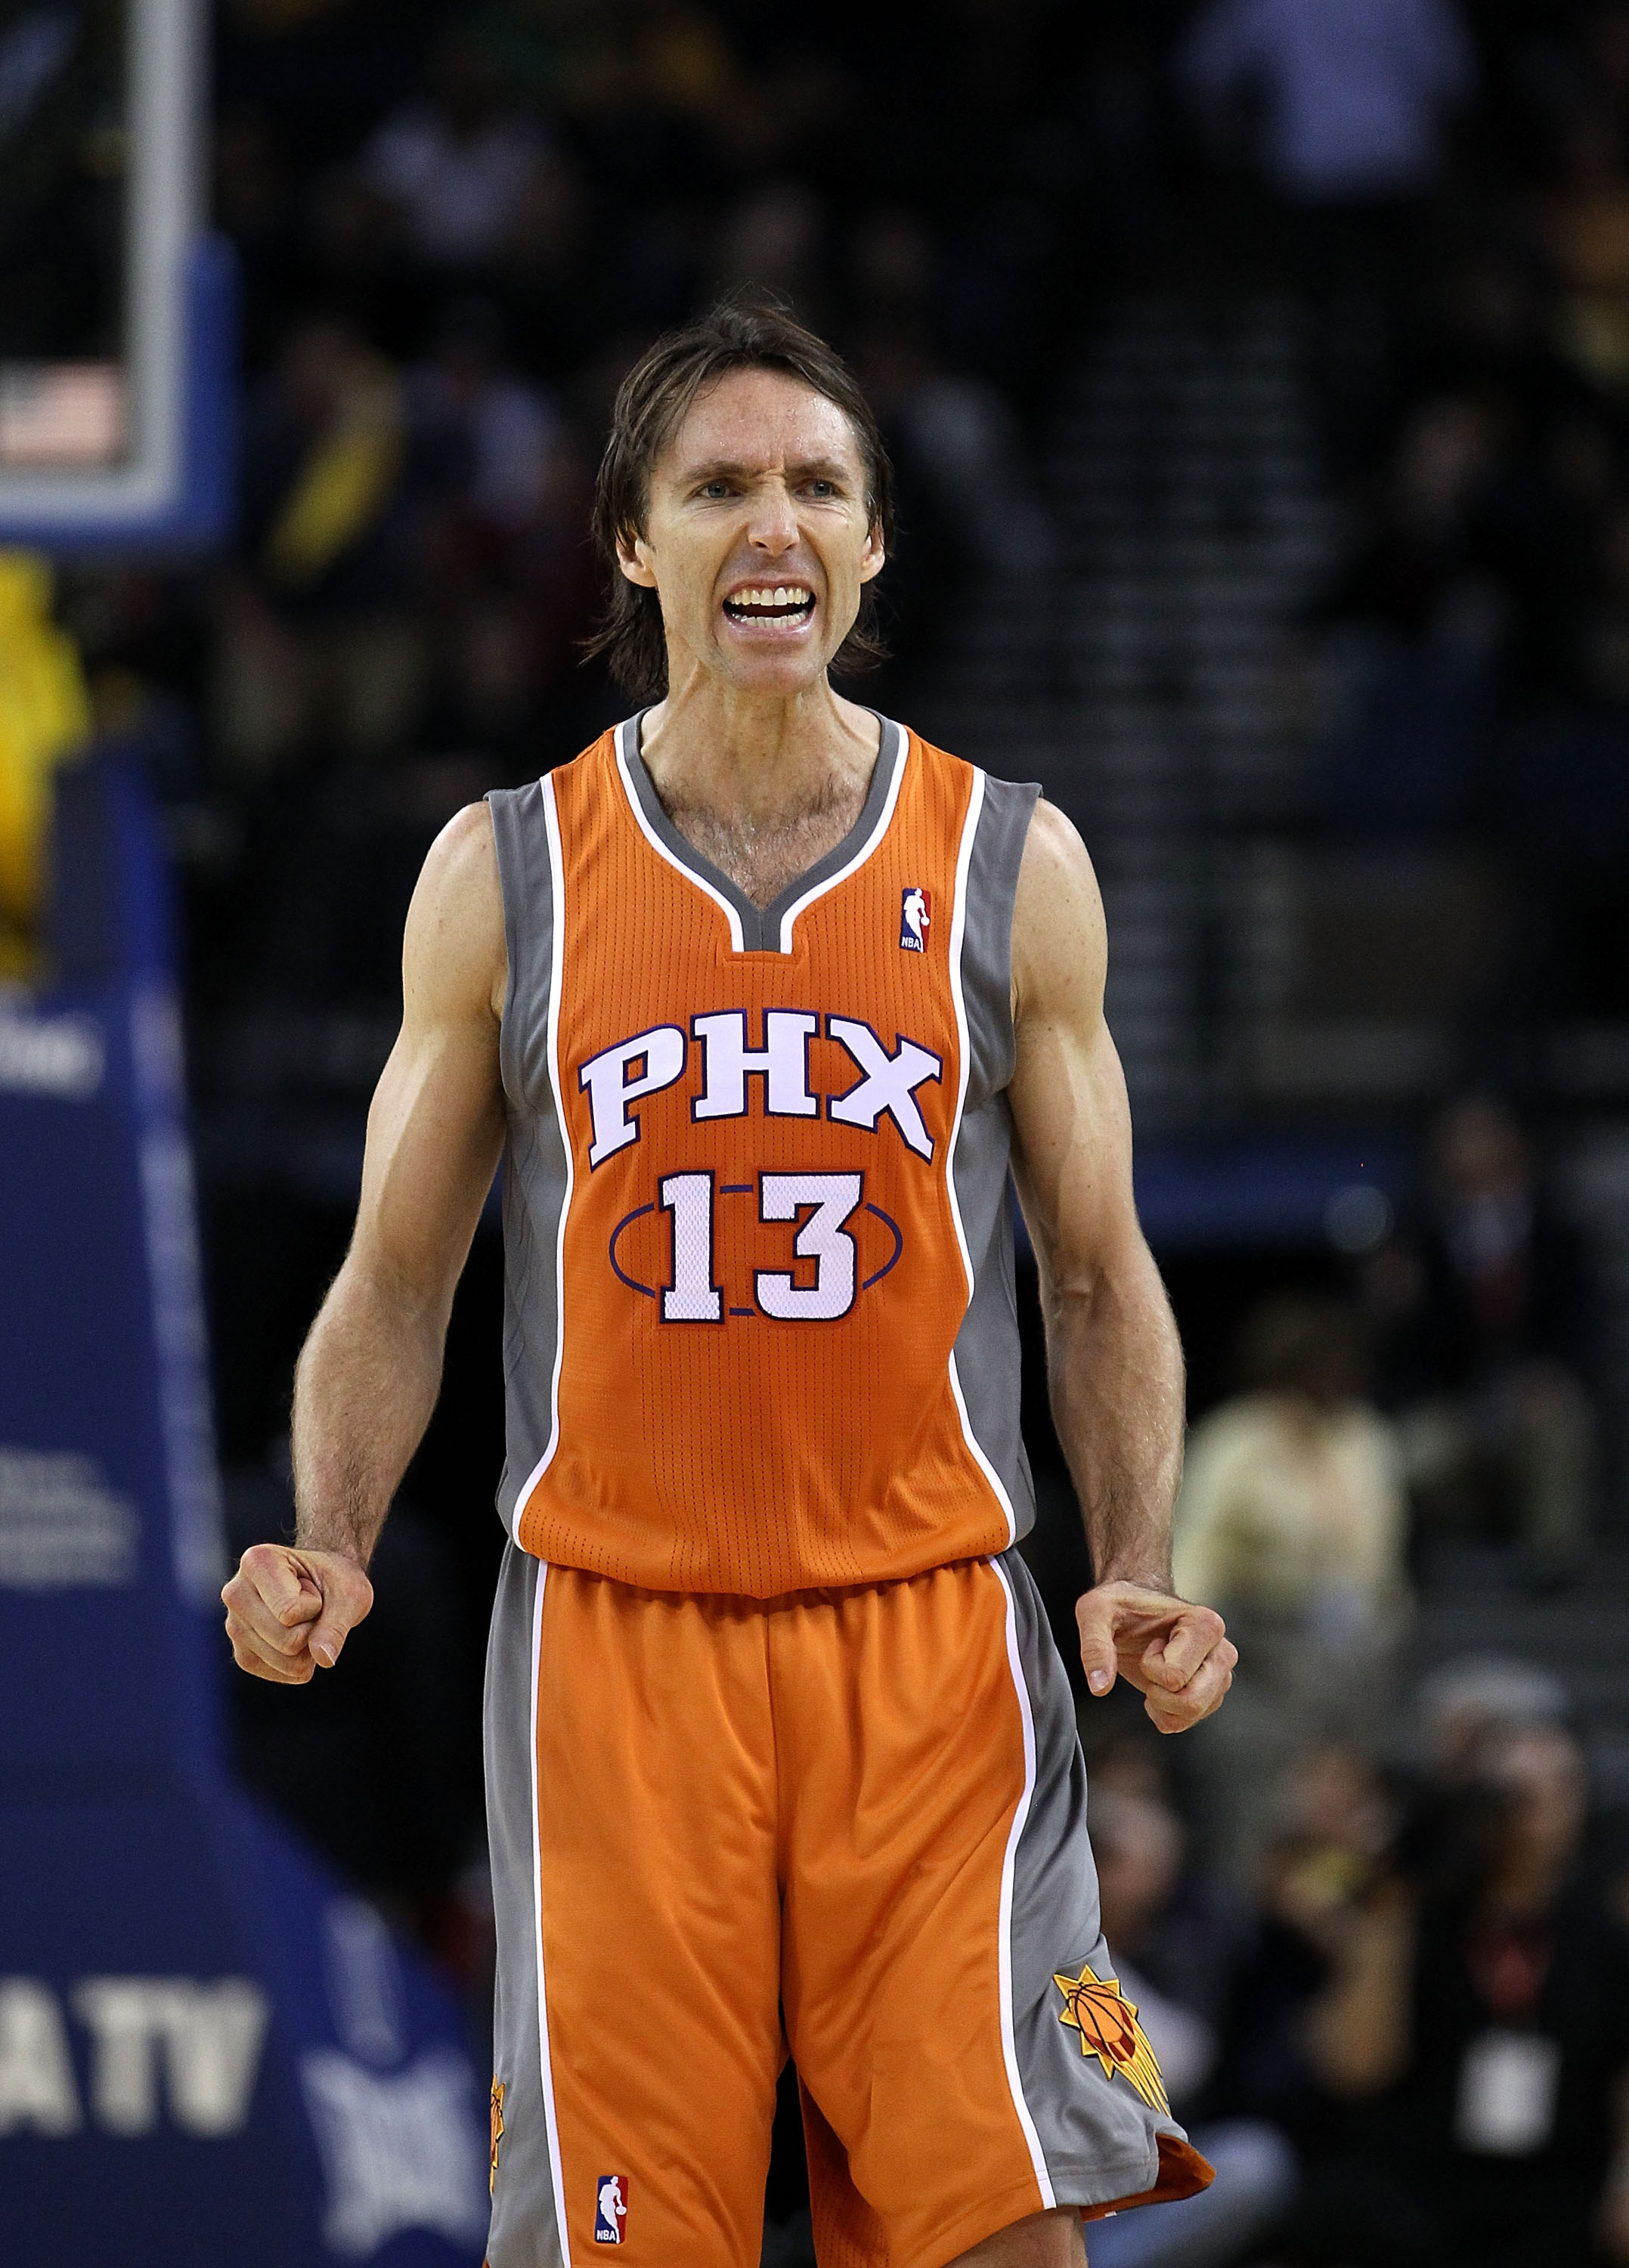 OAKLAND, CA - DECEMBER 02:  Steve Nash #13 of the Phoenix Suns reacts after the Suns made a basket against the Golden State Warriors at Oracle Arena on December 2, 2010 in Oakland, California. NOTE TO USER: User expressly acknowledges and agrees that, by